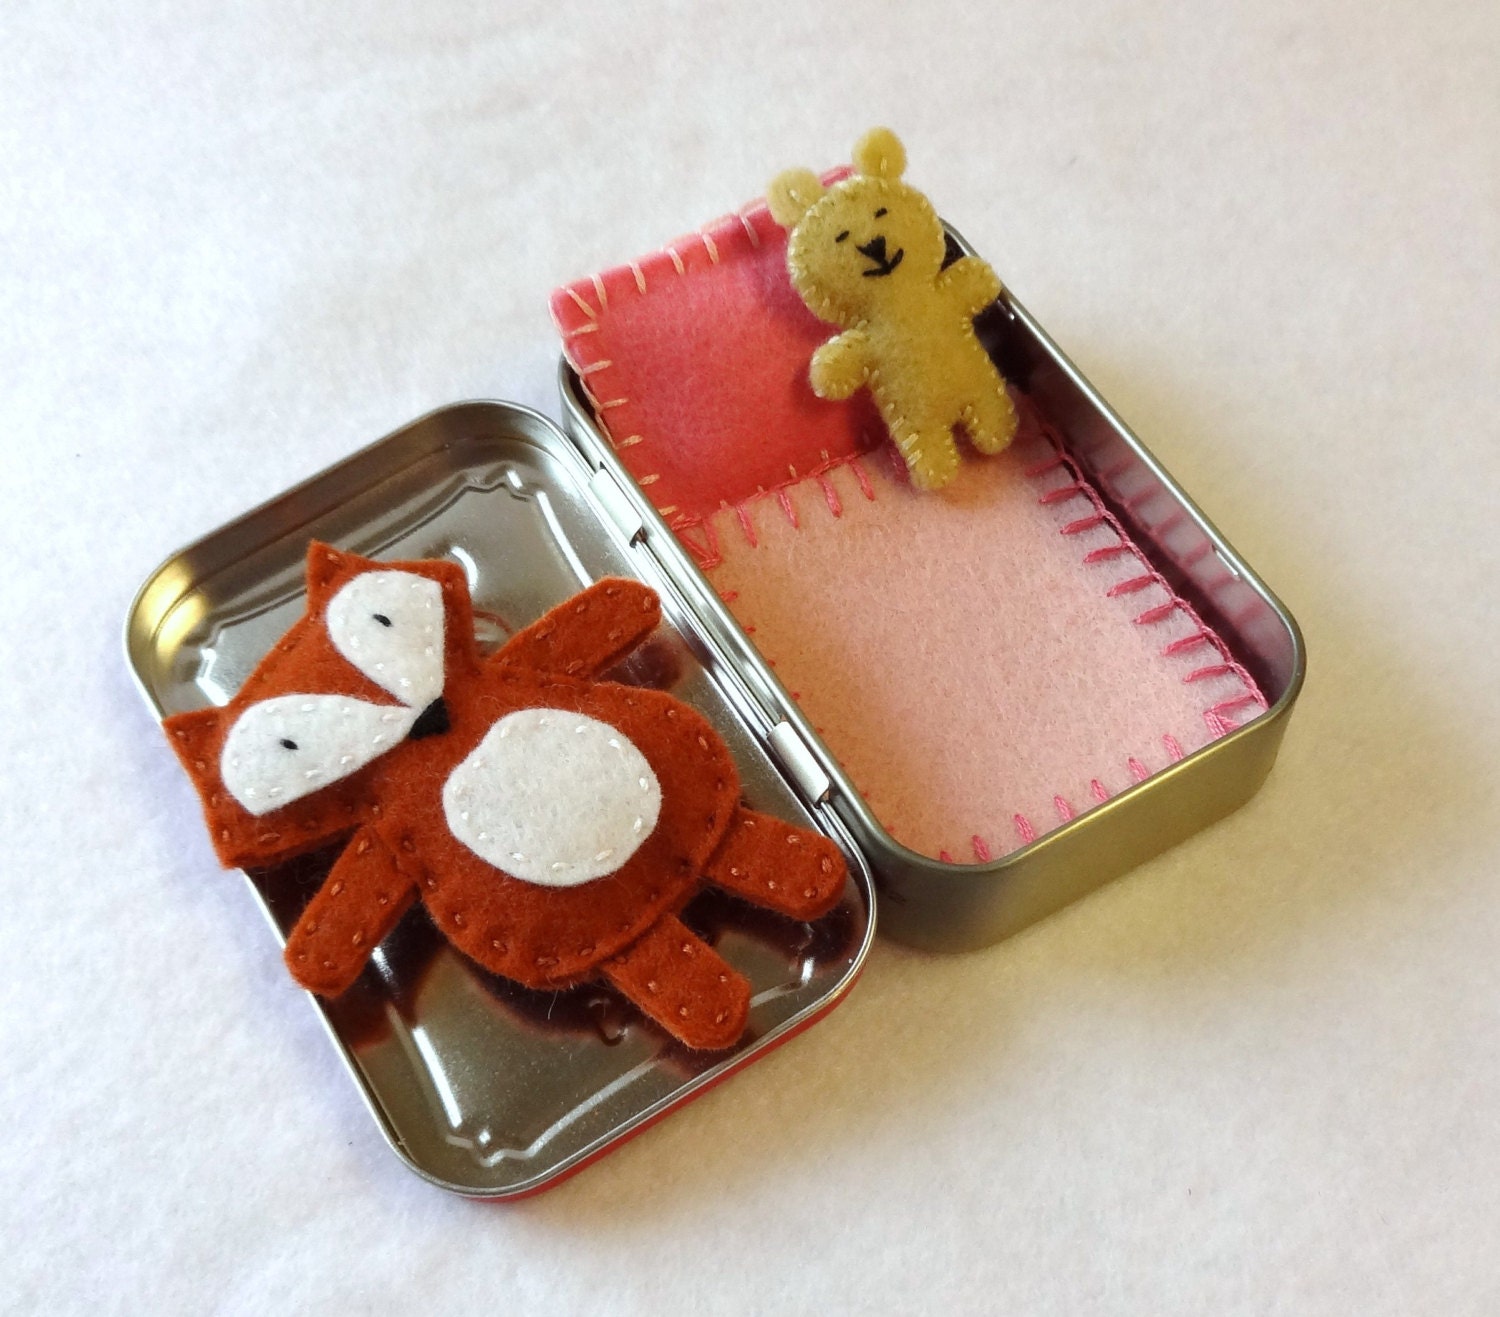 Fox in a Box with pink and red bedding - wool felt fox and teddy bear in Altoids Tin - made to order - EarthyMamaGoods